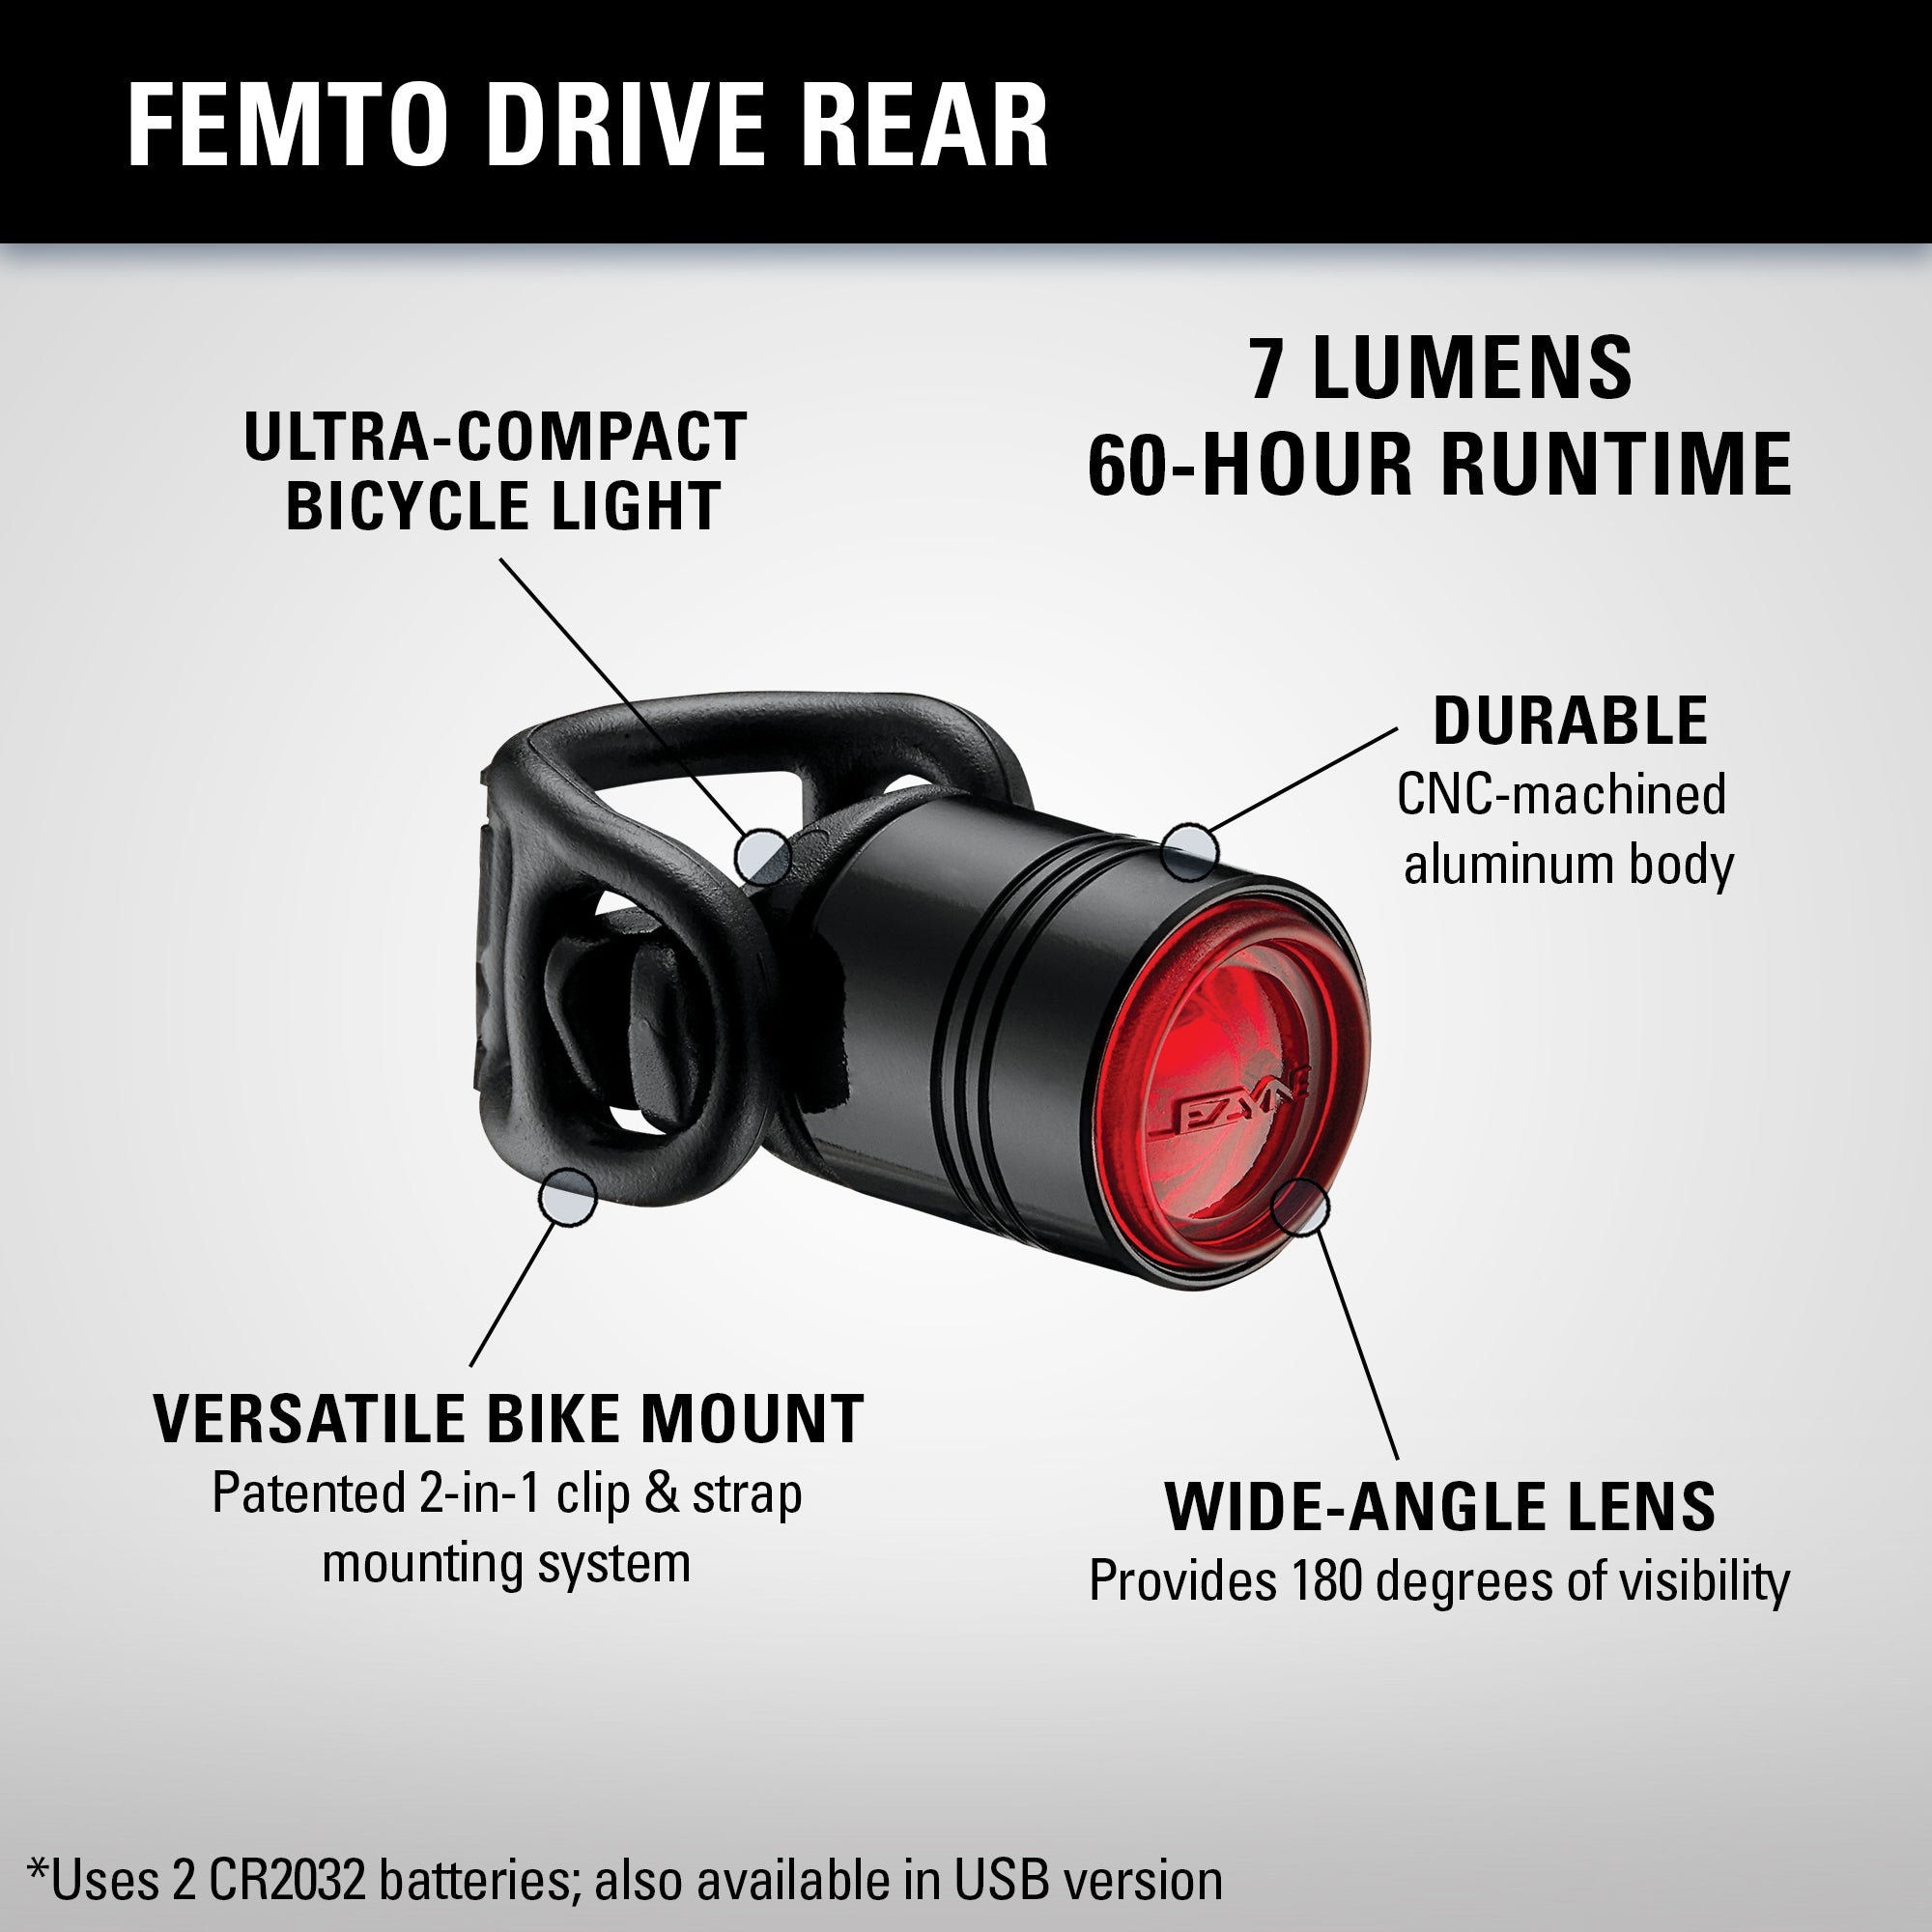 Infographic for Femto Drive Rear bike light. Ultra-compact bicycle light. 7-Lumens, 60-hour runtime. Durable - CNC-machined aluminum body. Versatile bike mount, patented 2-in-1 clip & strap mounting system. Wide-angle lens, provides 180-degrees of visibility. 